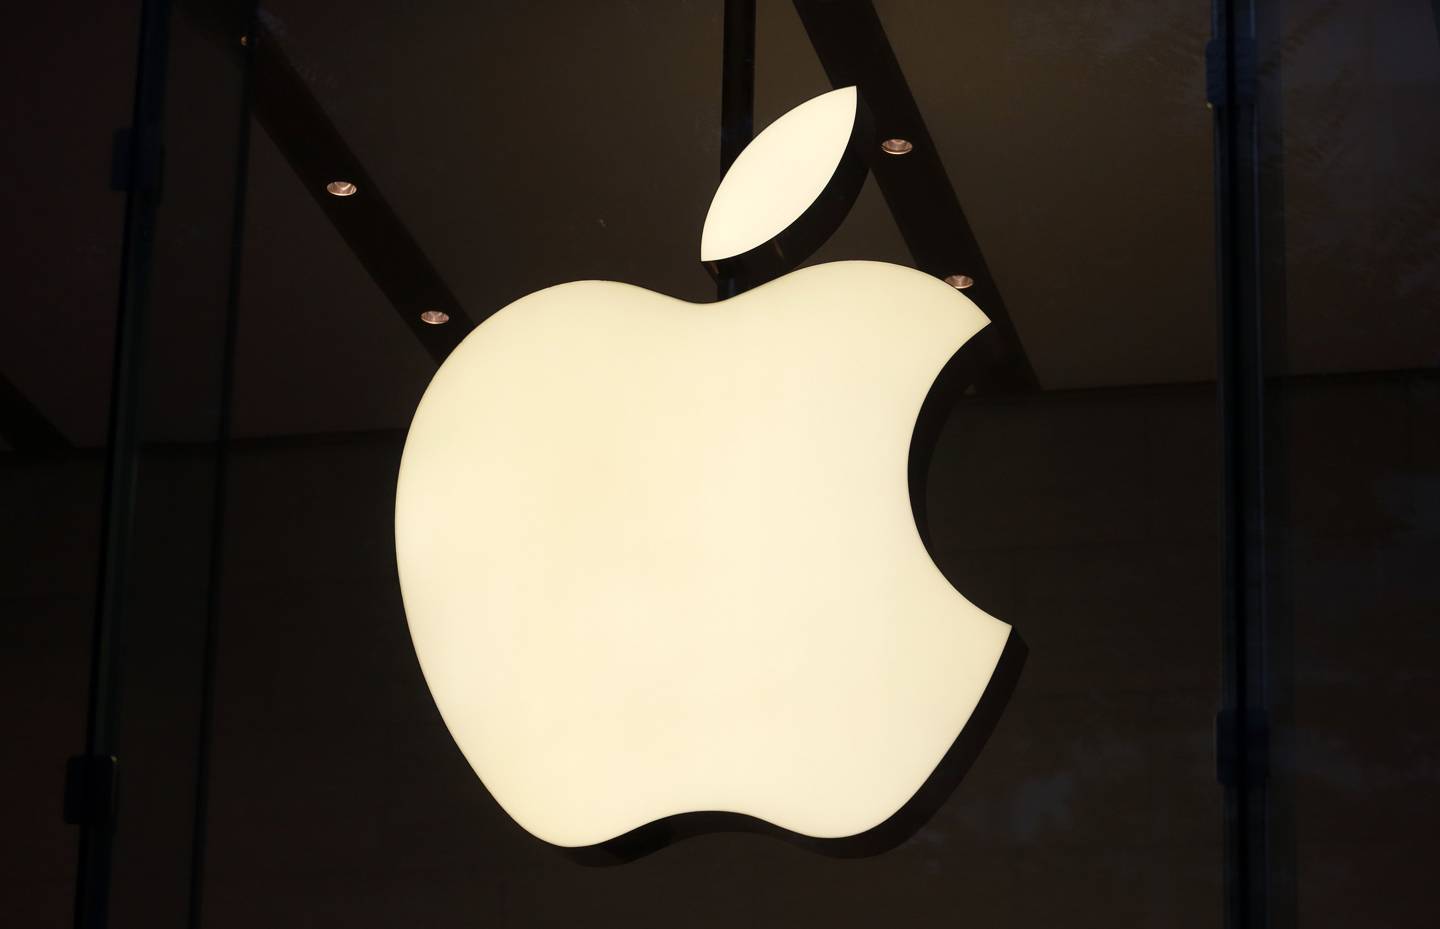 Apple takes on the European Commission over €13bn tax charge - Wired.co.uk